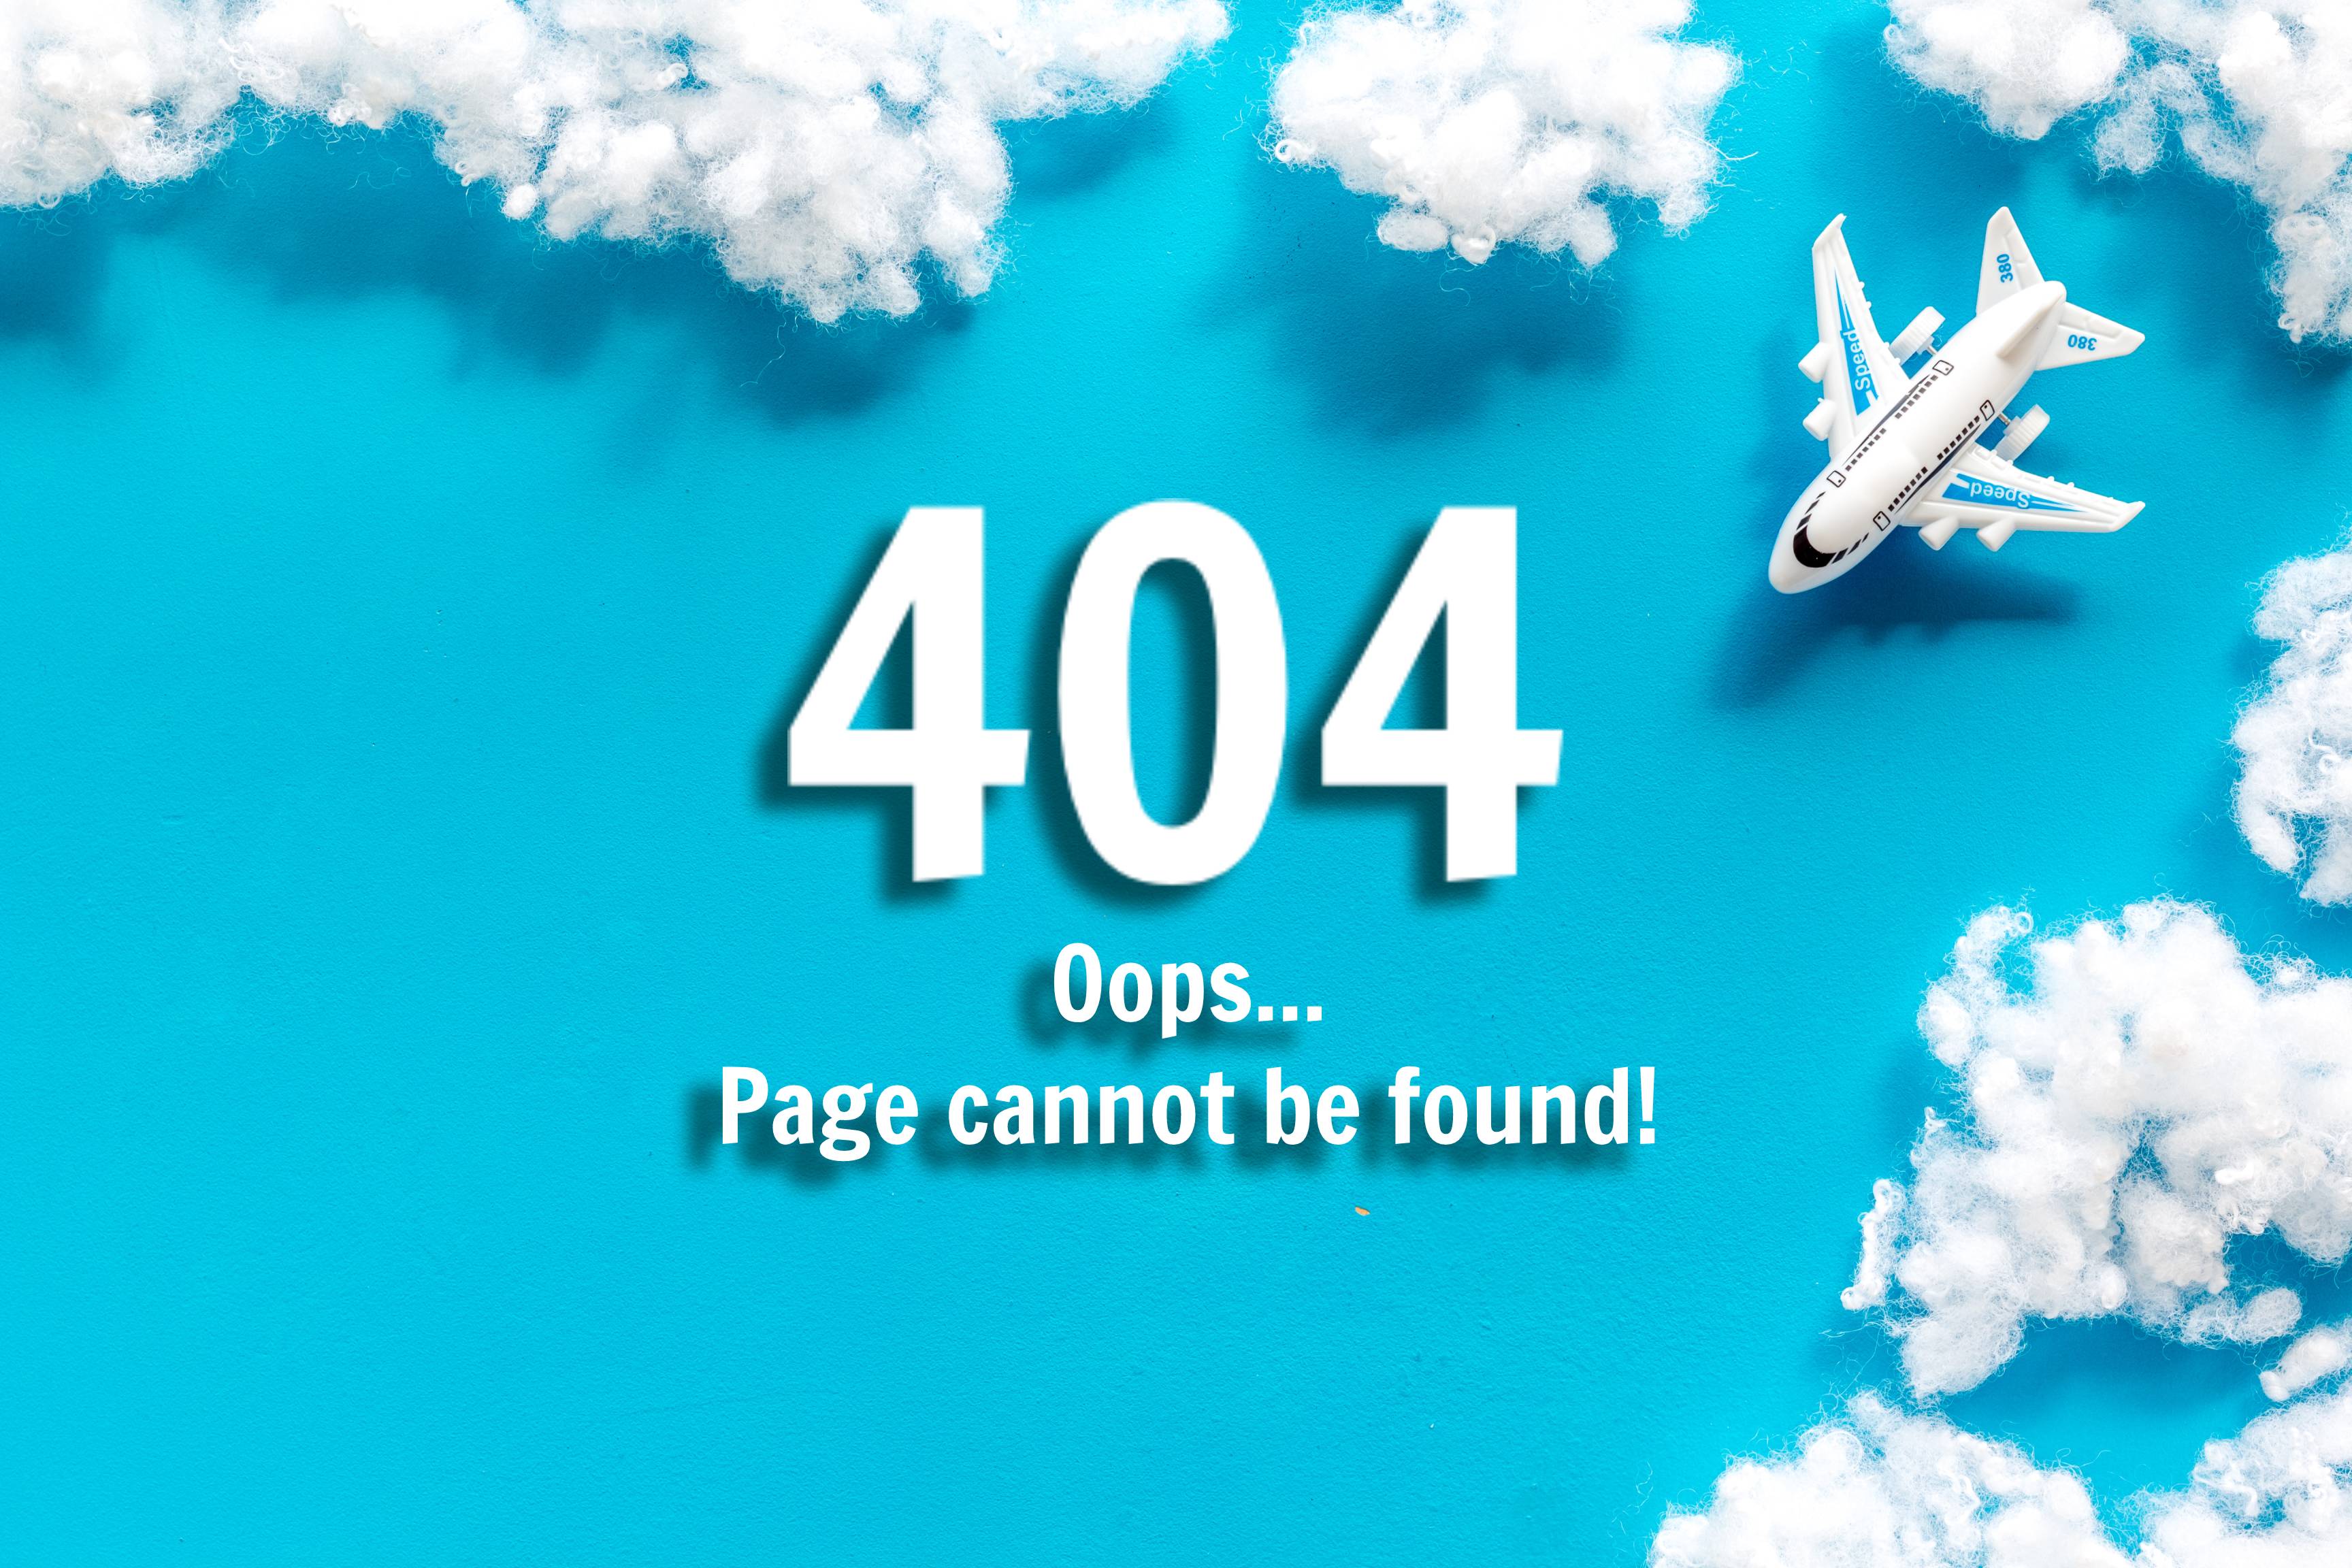 Image of cartoon plane over blue background and cotton clouds with text saying 404 page cannot be found